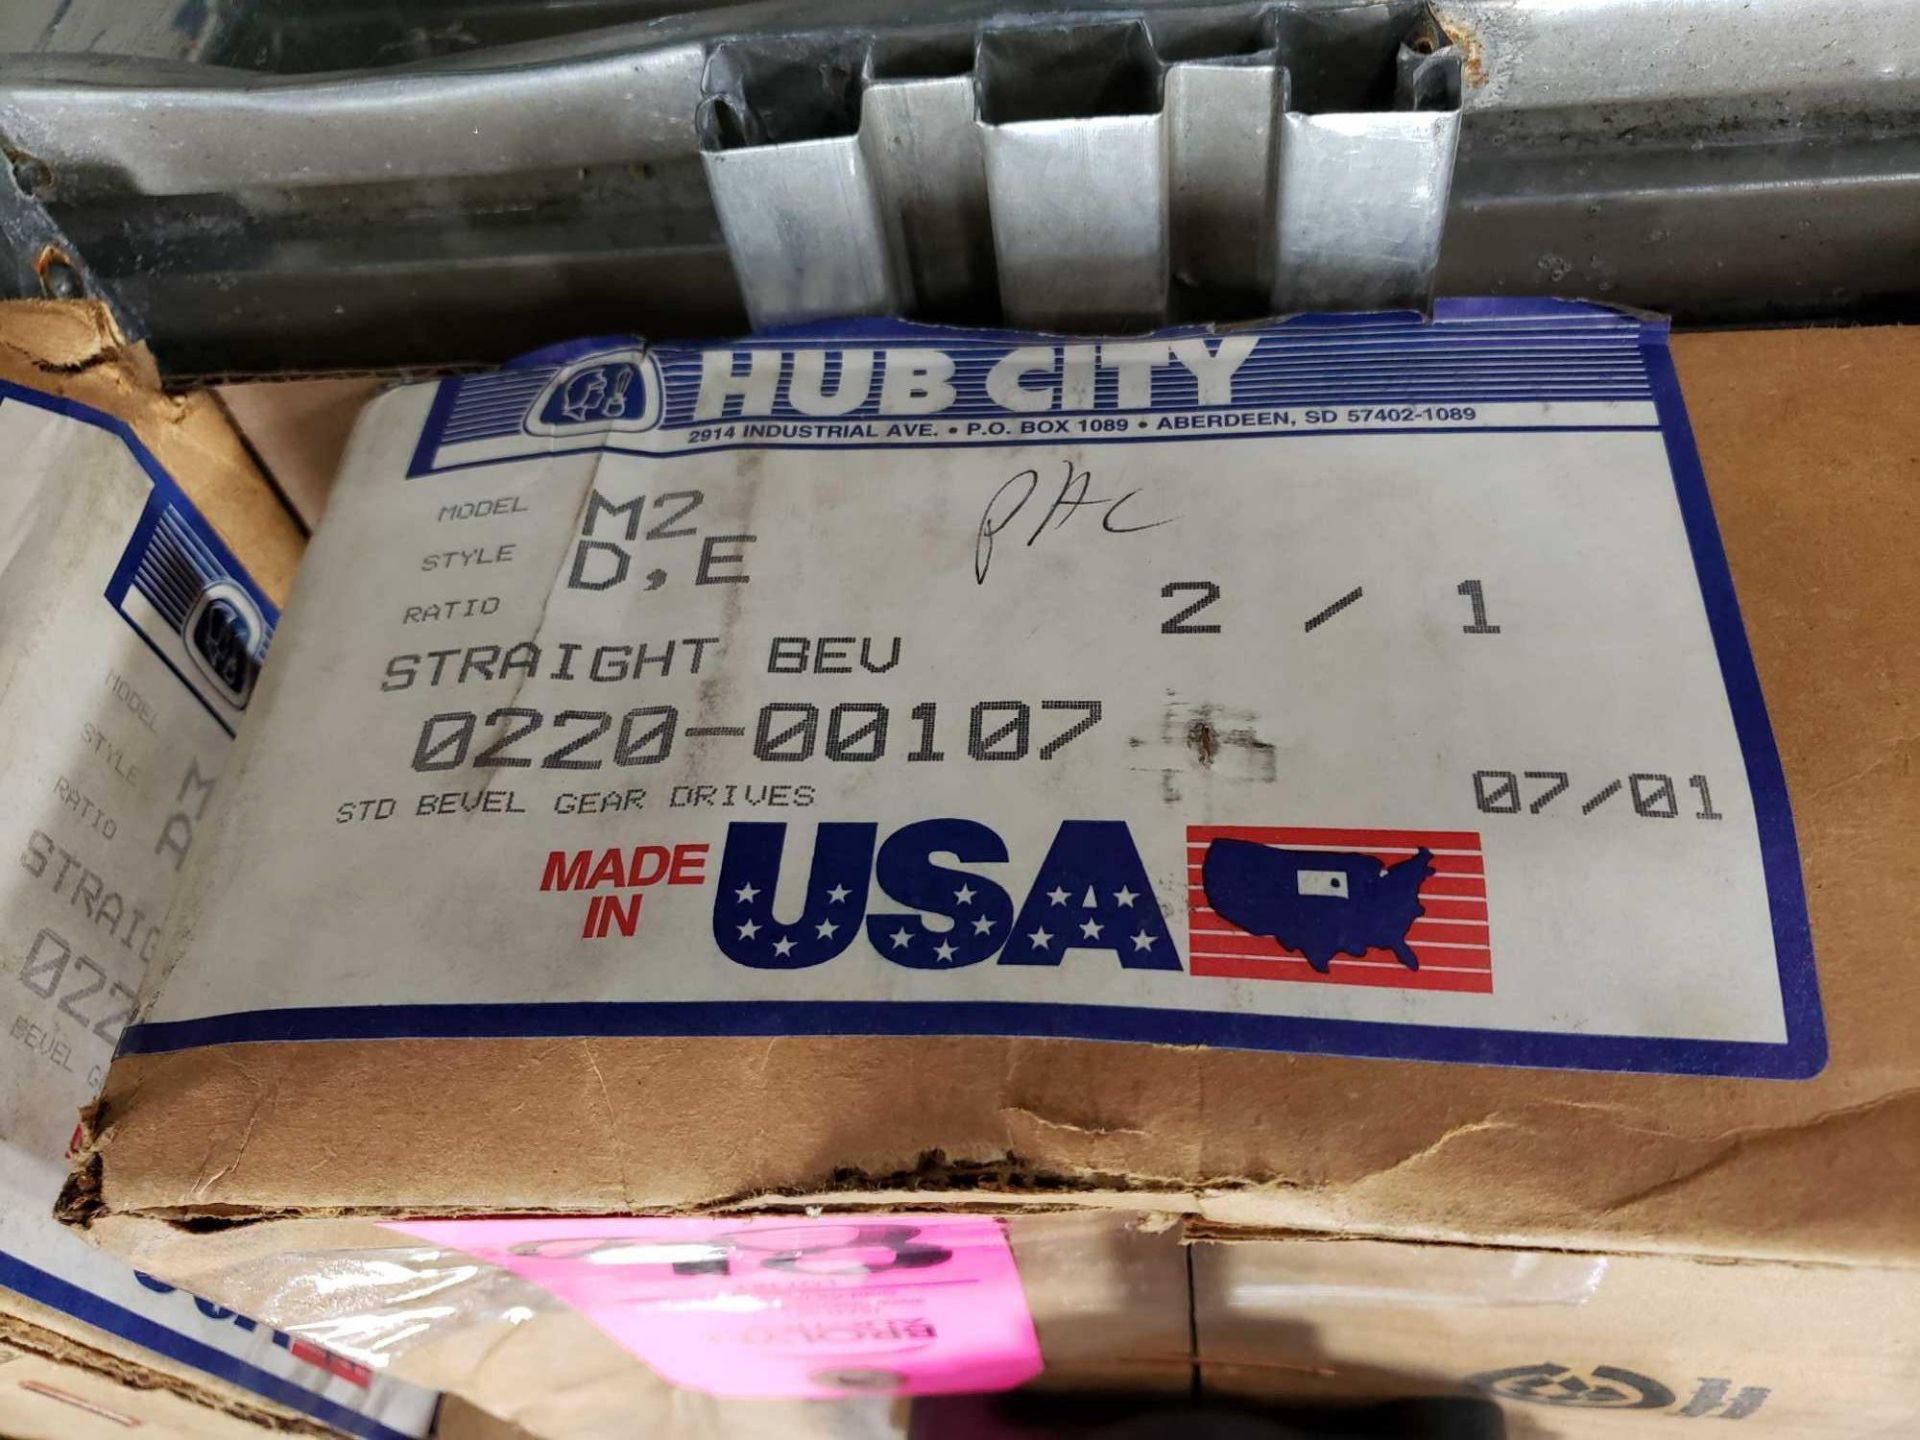 Hub City gear box speed reducer model M2, ratio 2/1, style DE. New in box. - Image 4 of 4